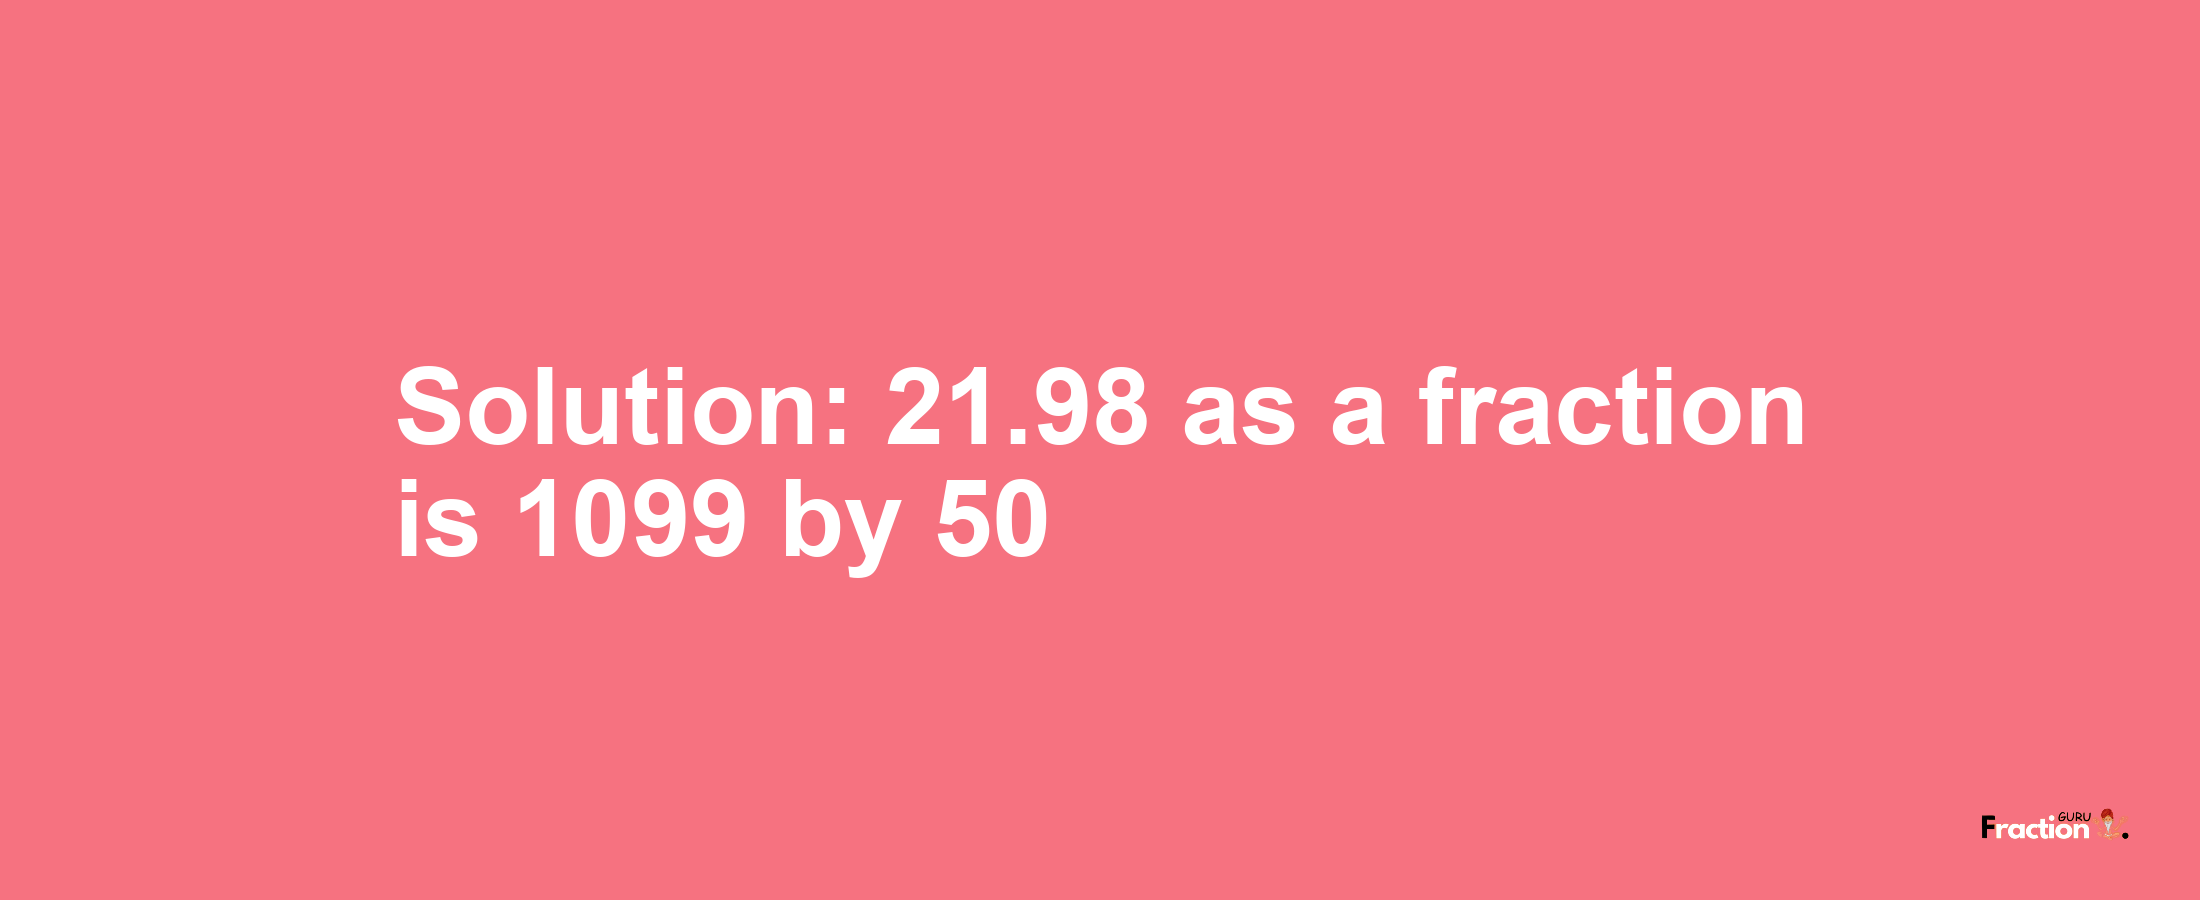 Solution:21.98 as a fraction is 1099/50